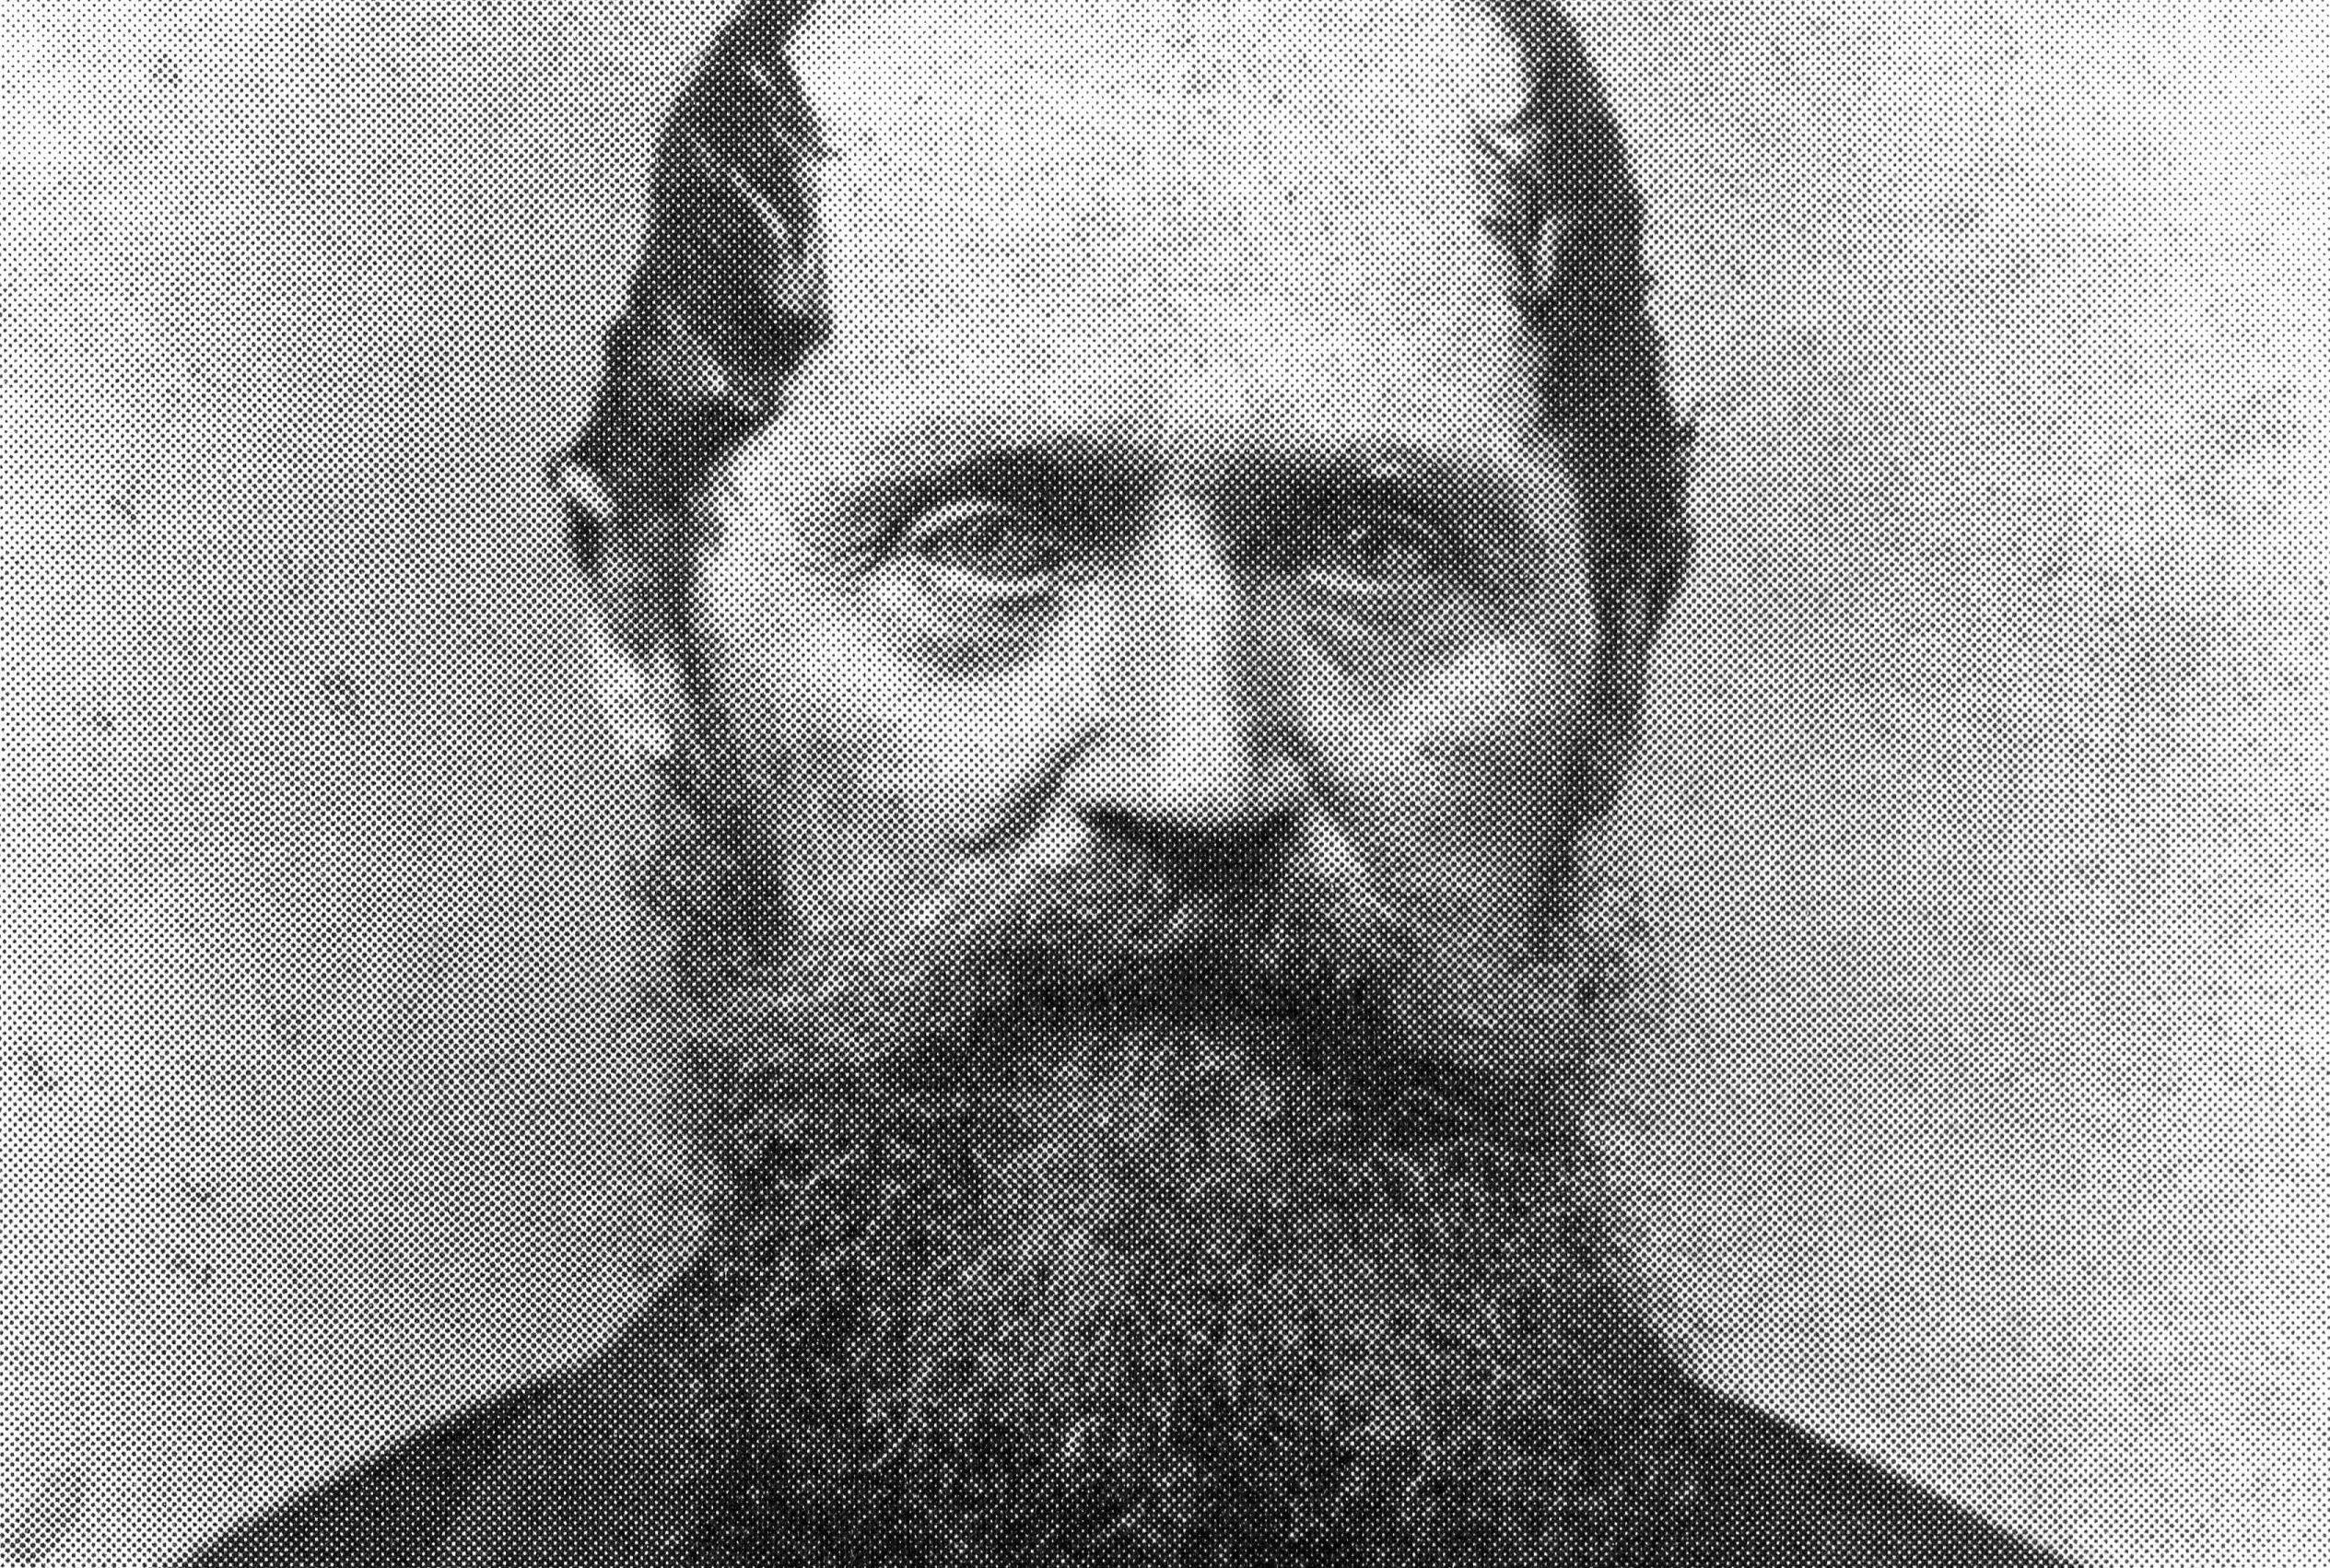 How Lewis Keseberg Was Branded The Killer Cannibal Of The Donner Party Mental Floss